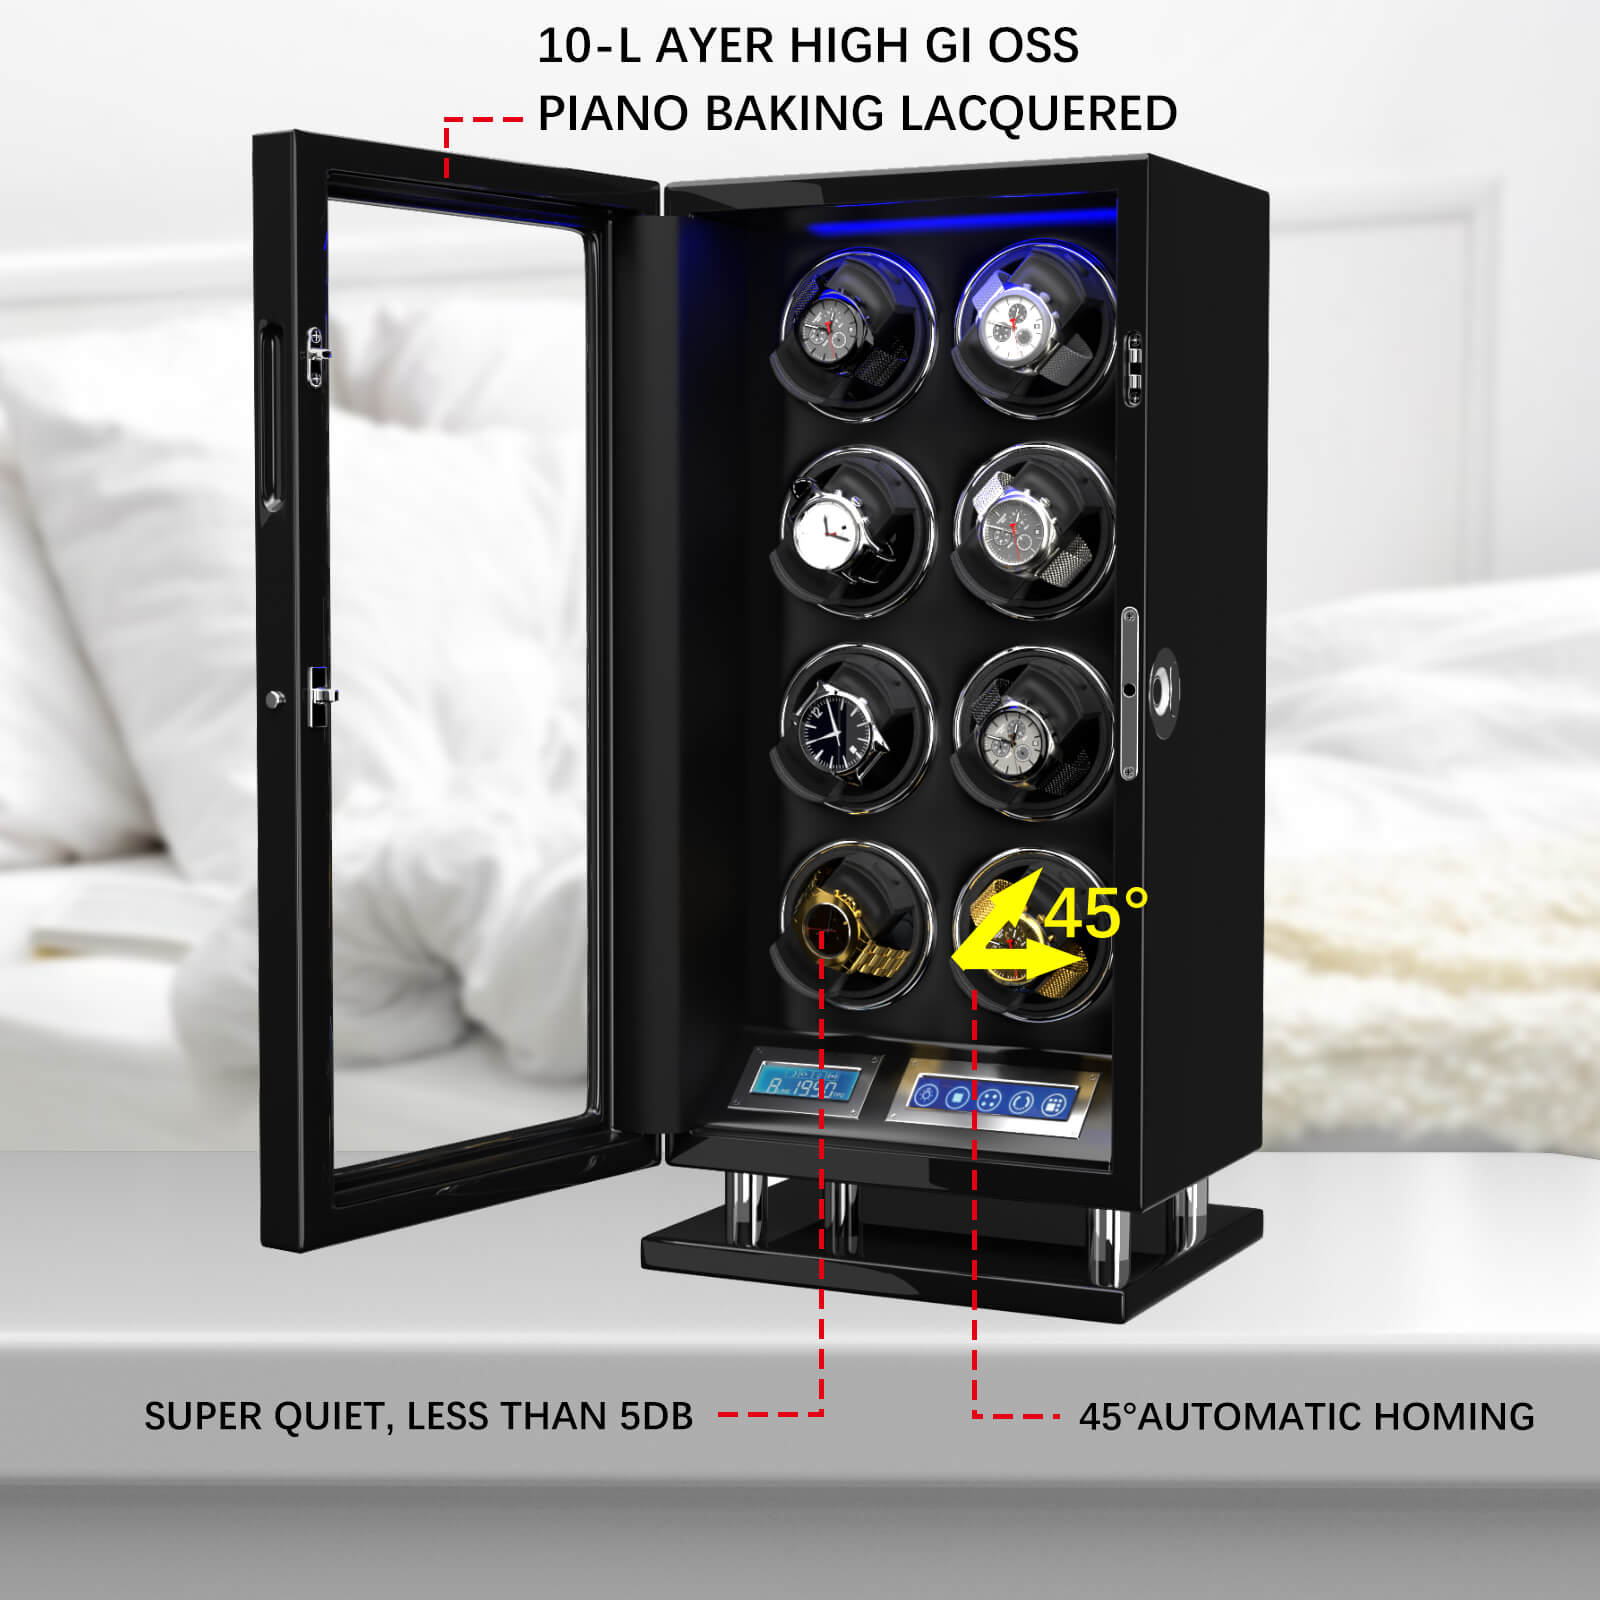 Watch Winder for 8 Automatic Watches with Fingerprint Unlock Ultra-Quiet Motors